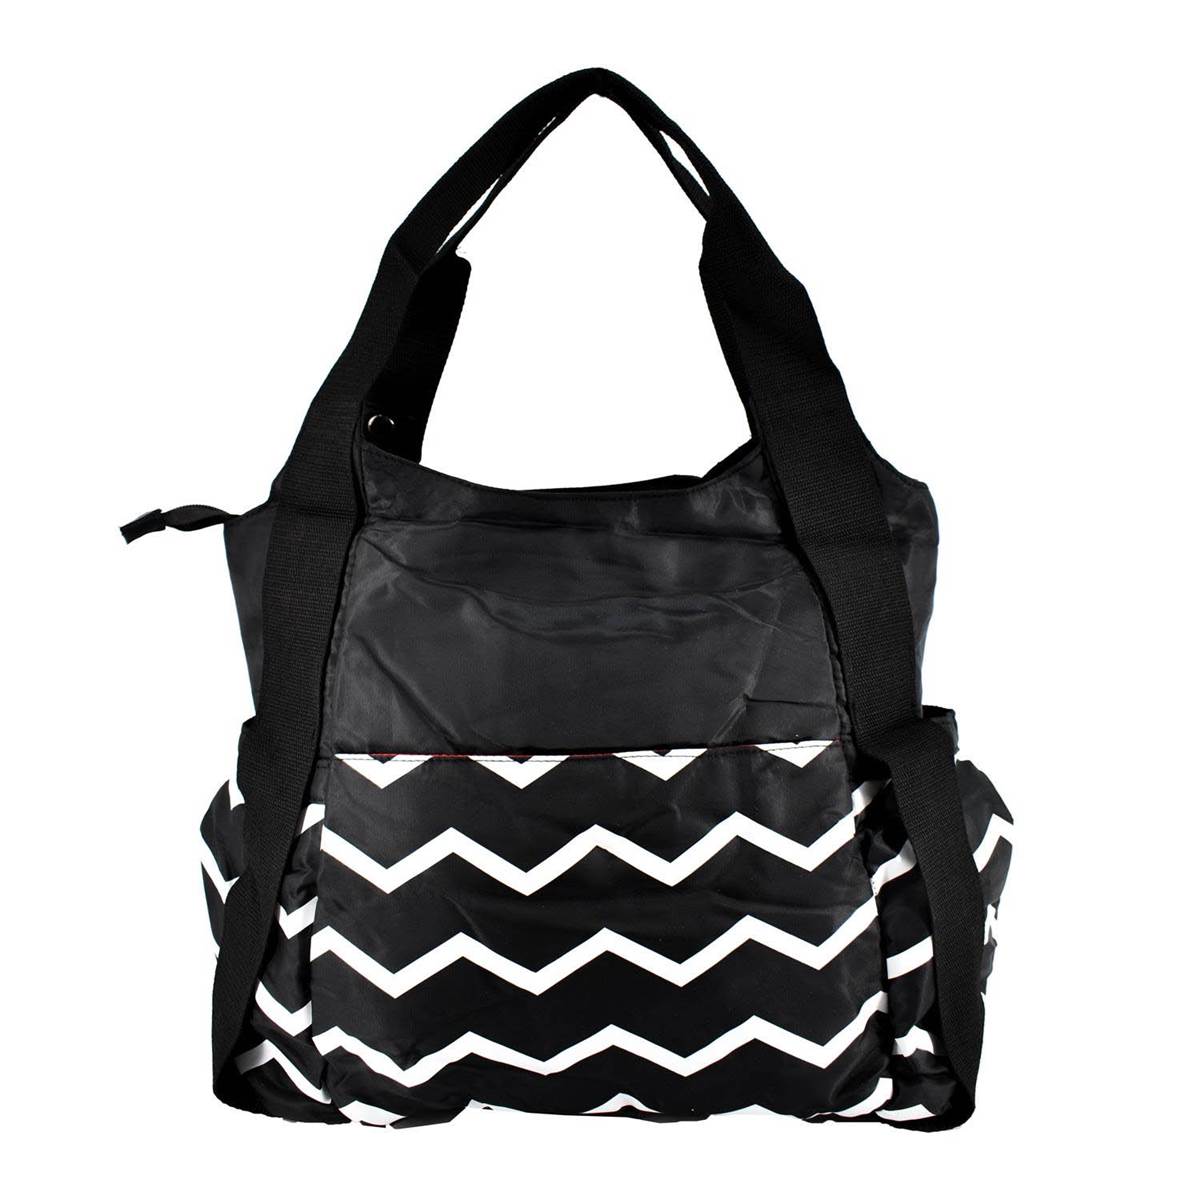 Baby Essentlals Mother Bag with Diaper Changing Mat - Black